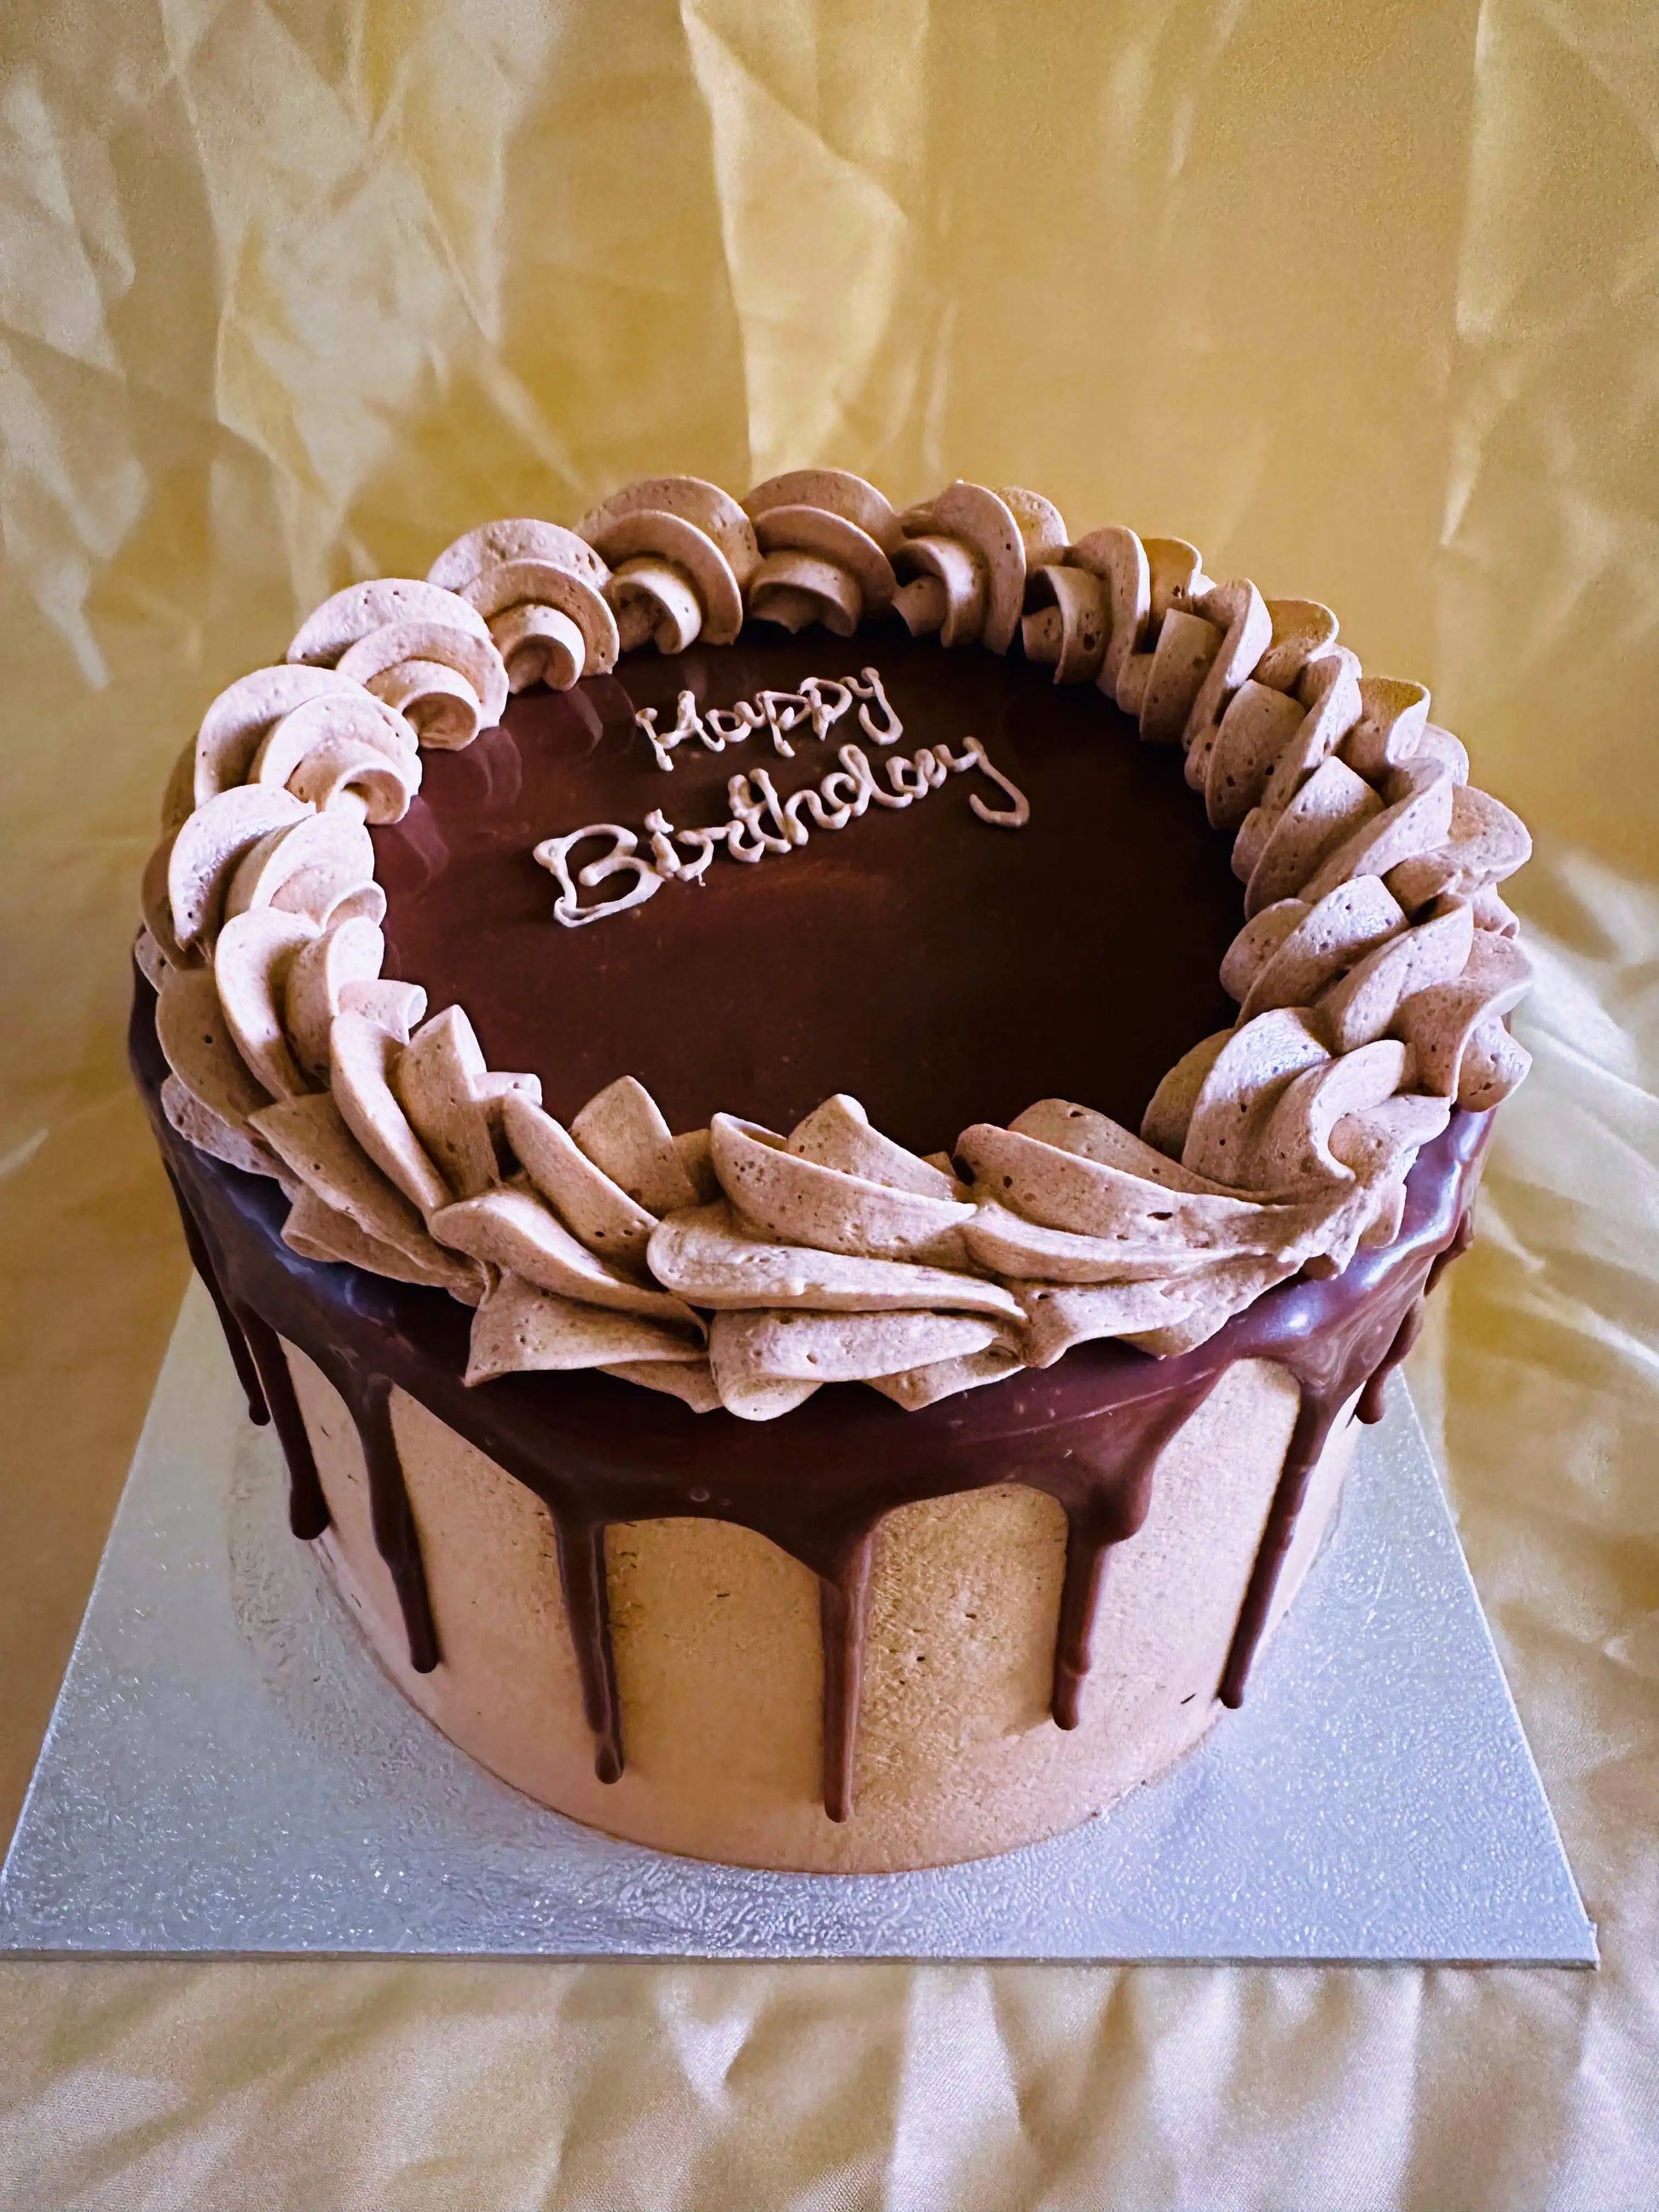 Chocolate Drip Cake Birthday Celebratoin Cake Delivery in East London